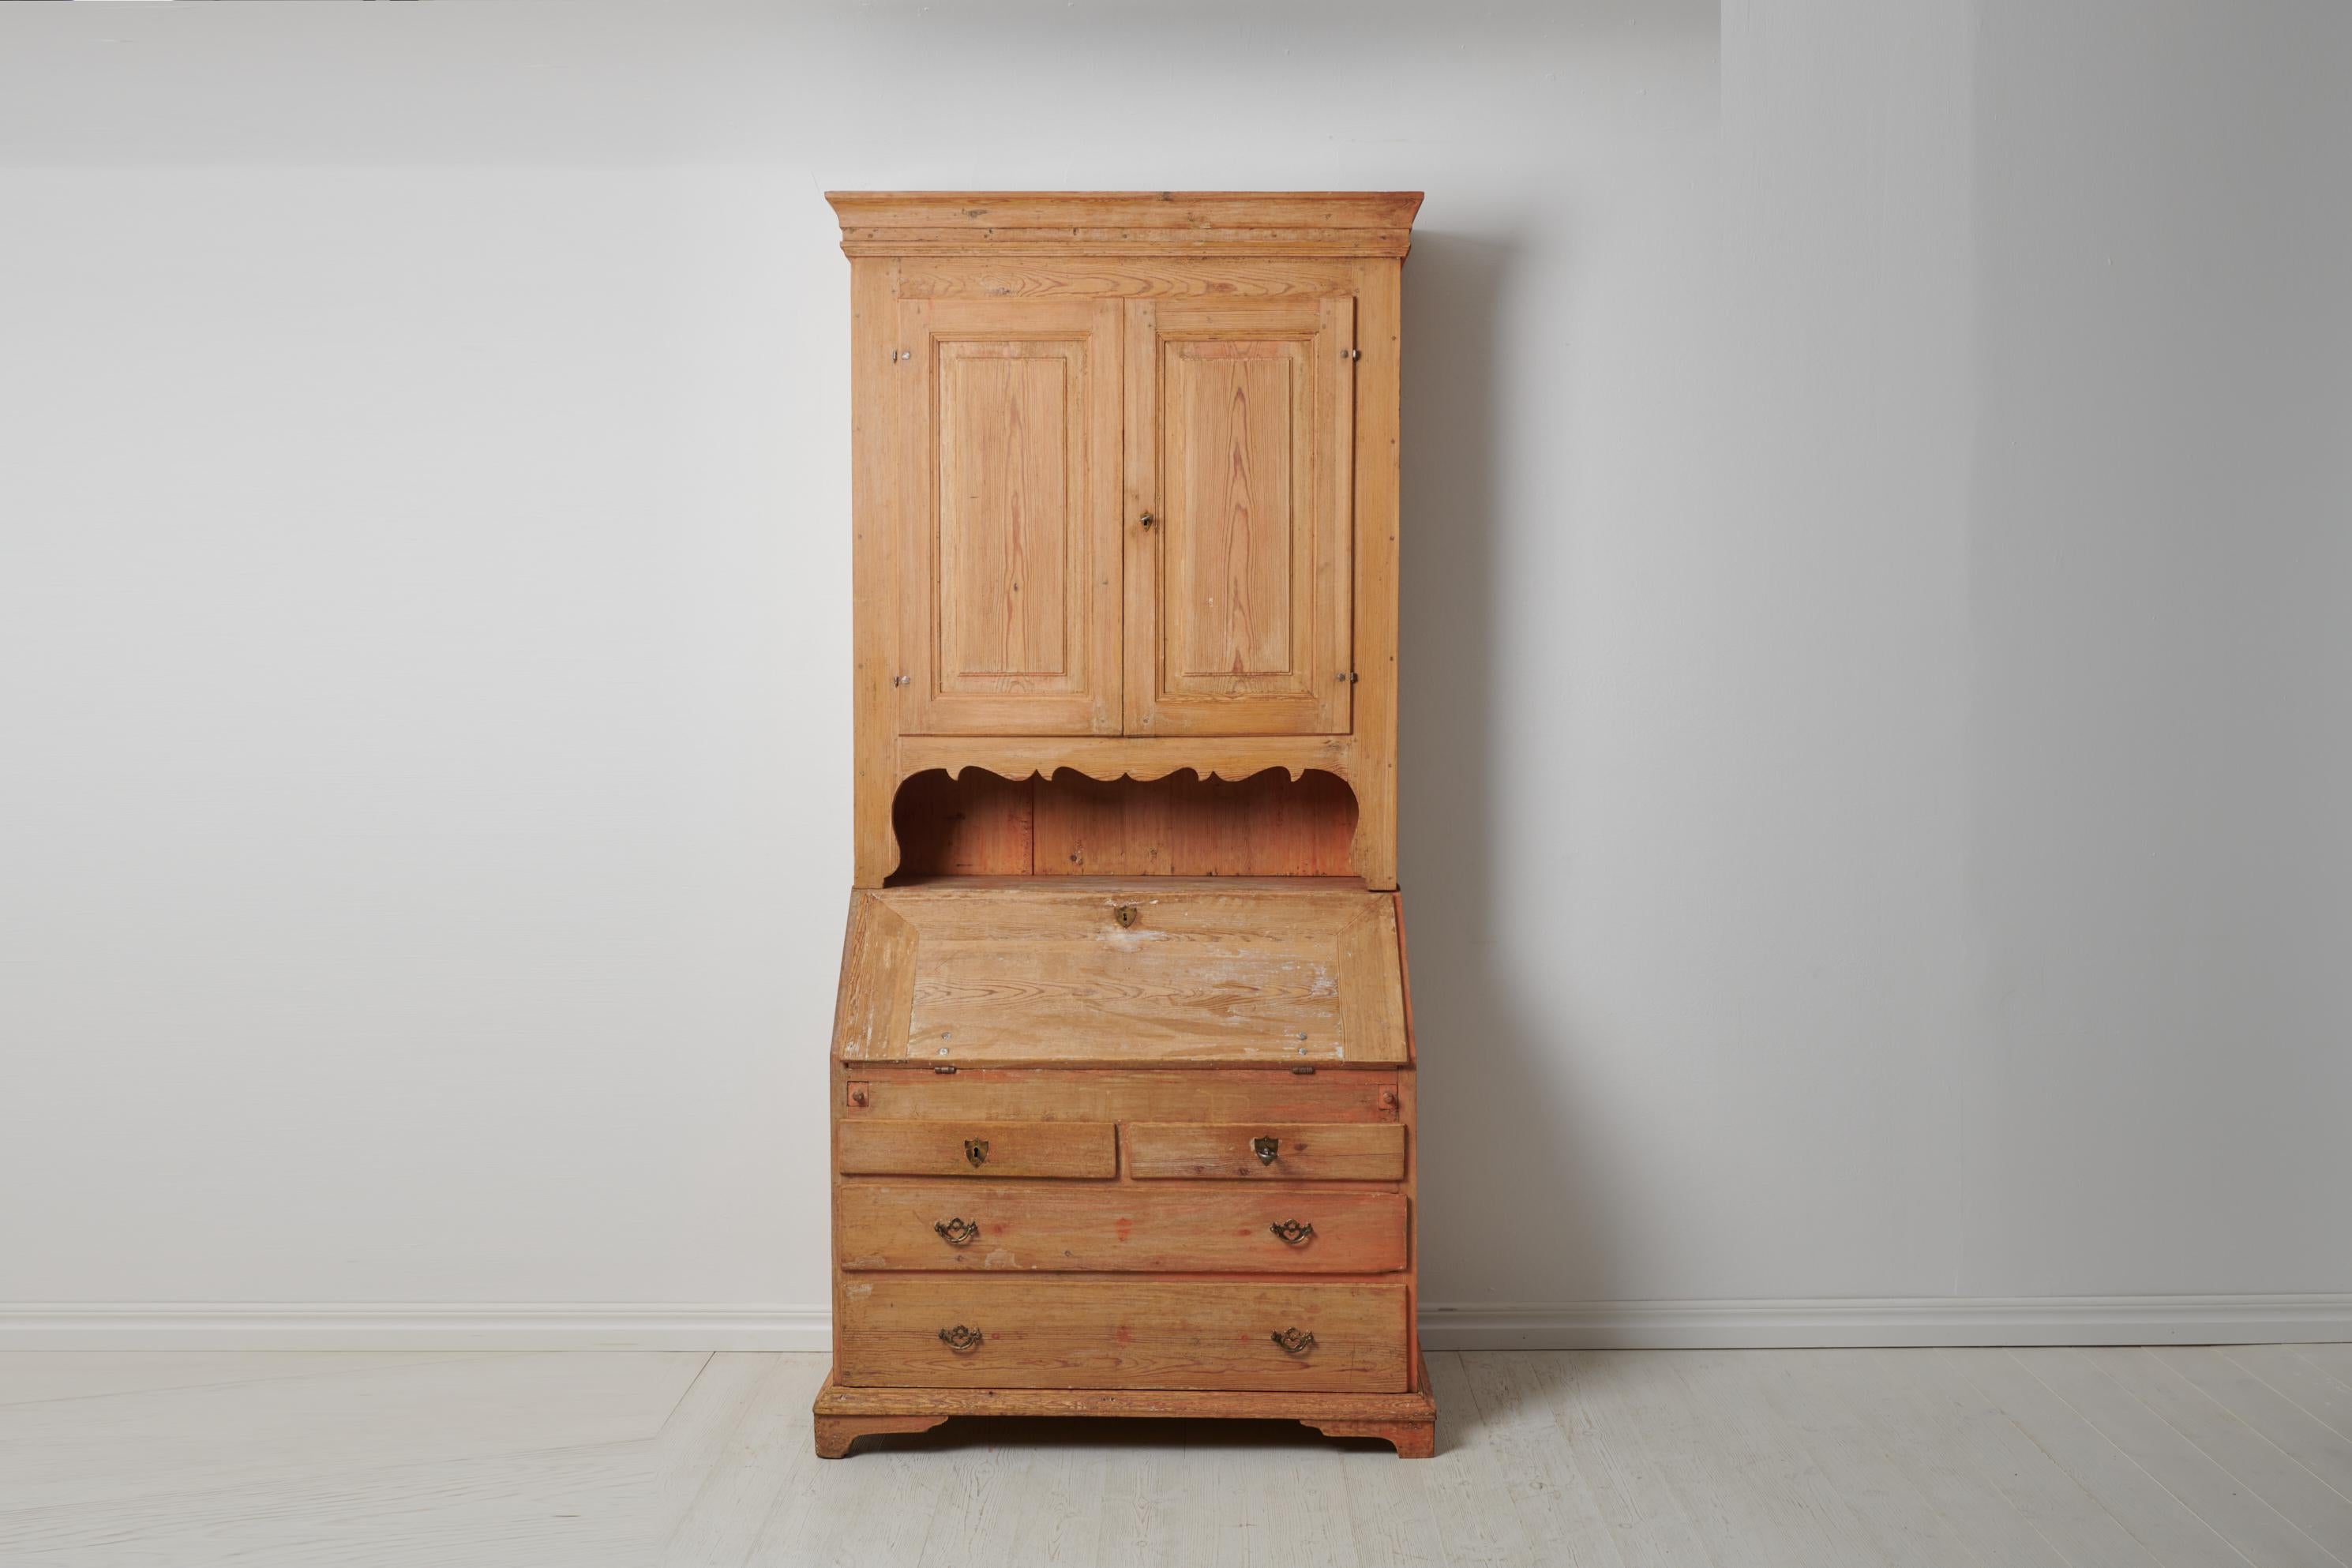 Antique Swedish secretary cabinet in gustavian style. The cabinet is made in northern Sweden around the 1820s. The cabinet is a well crafted piece in two parts made by hand in solid pine. The exterior has significant distress to the paint, the